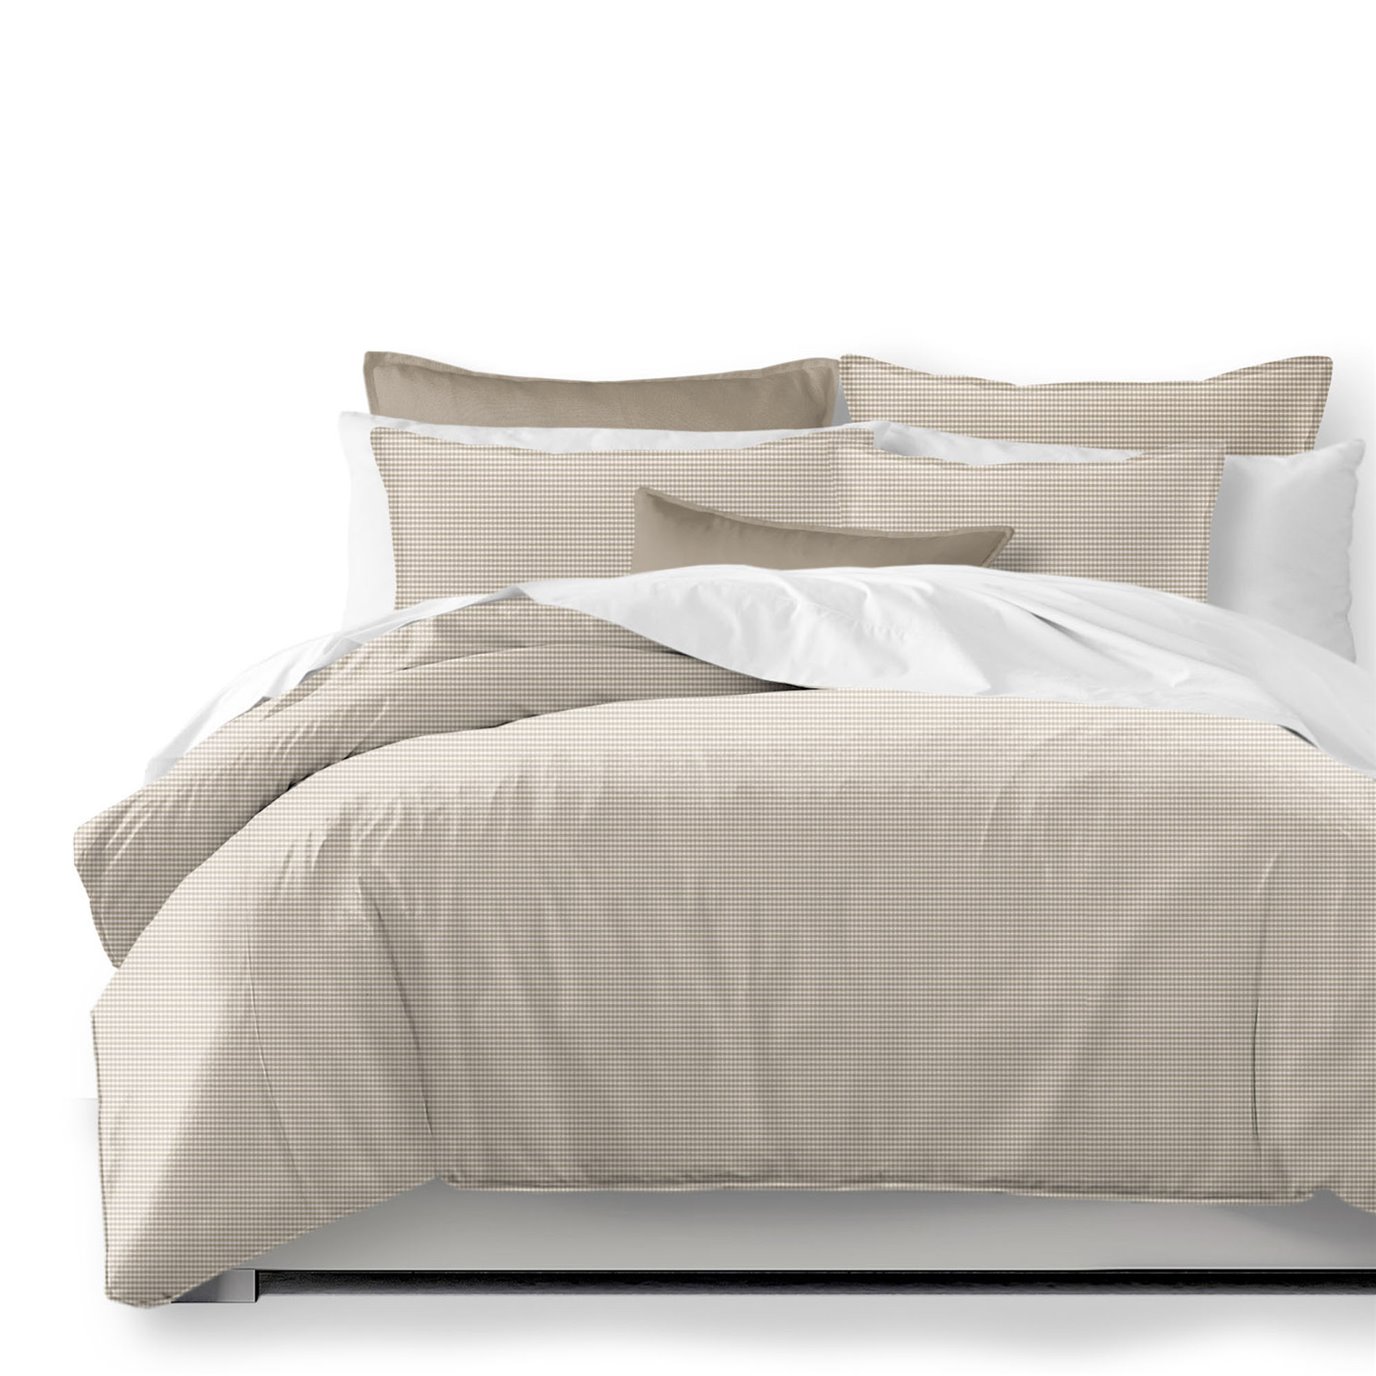 Rockton Check Taupe Comforter and Pillow Sham(s) Set - Size Queen